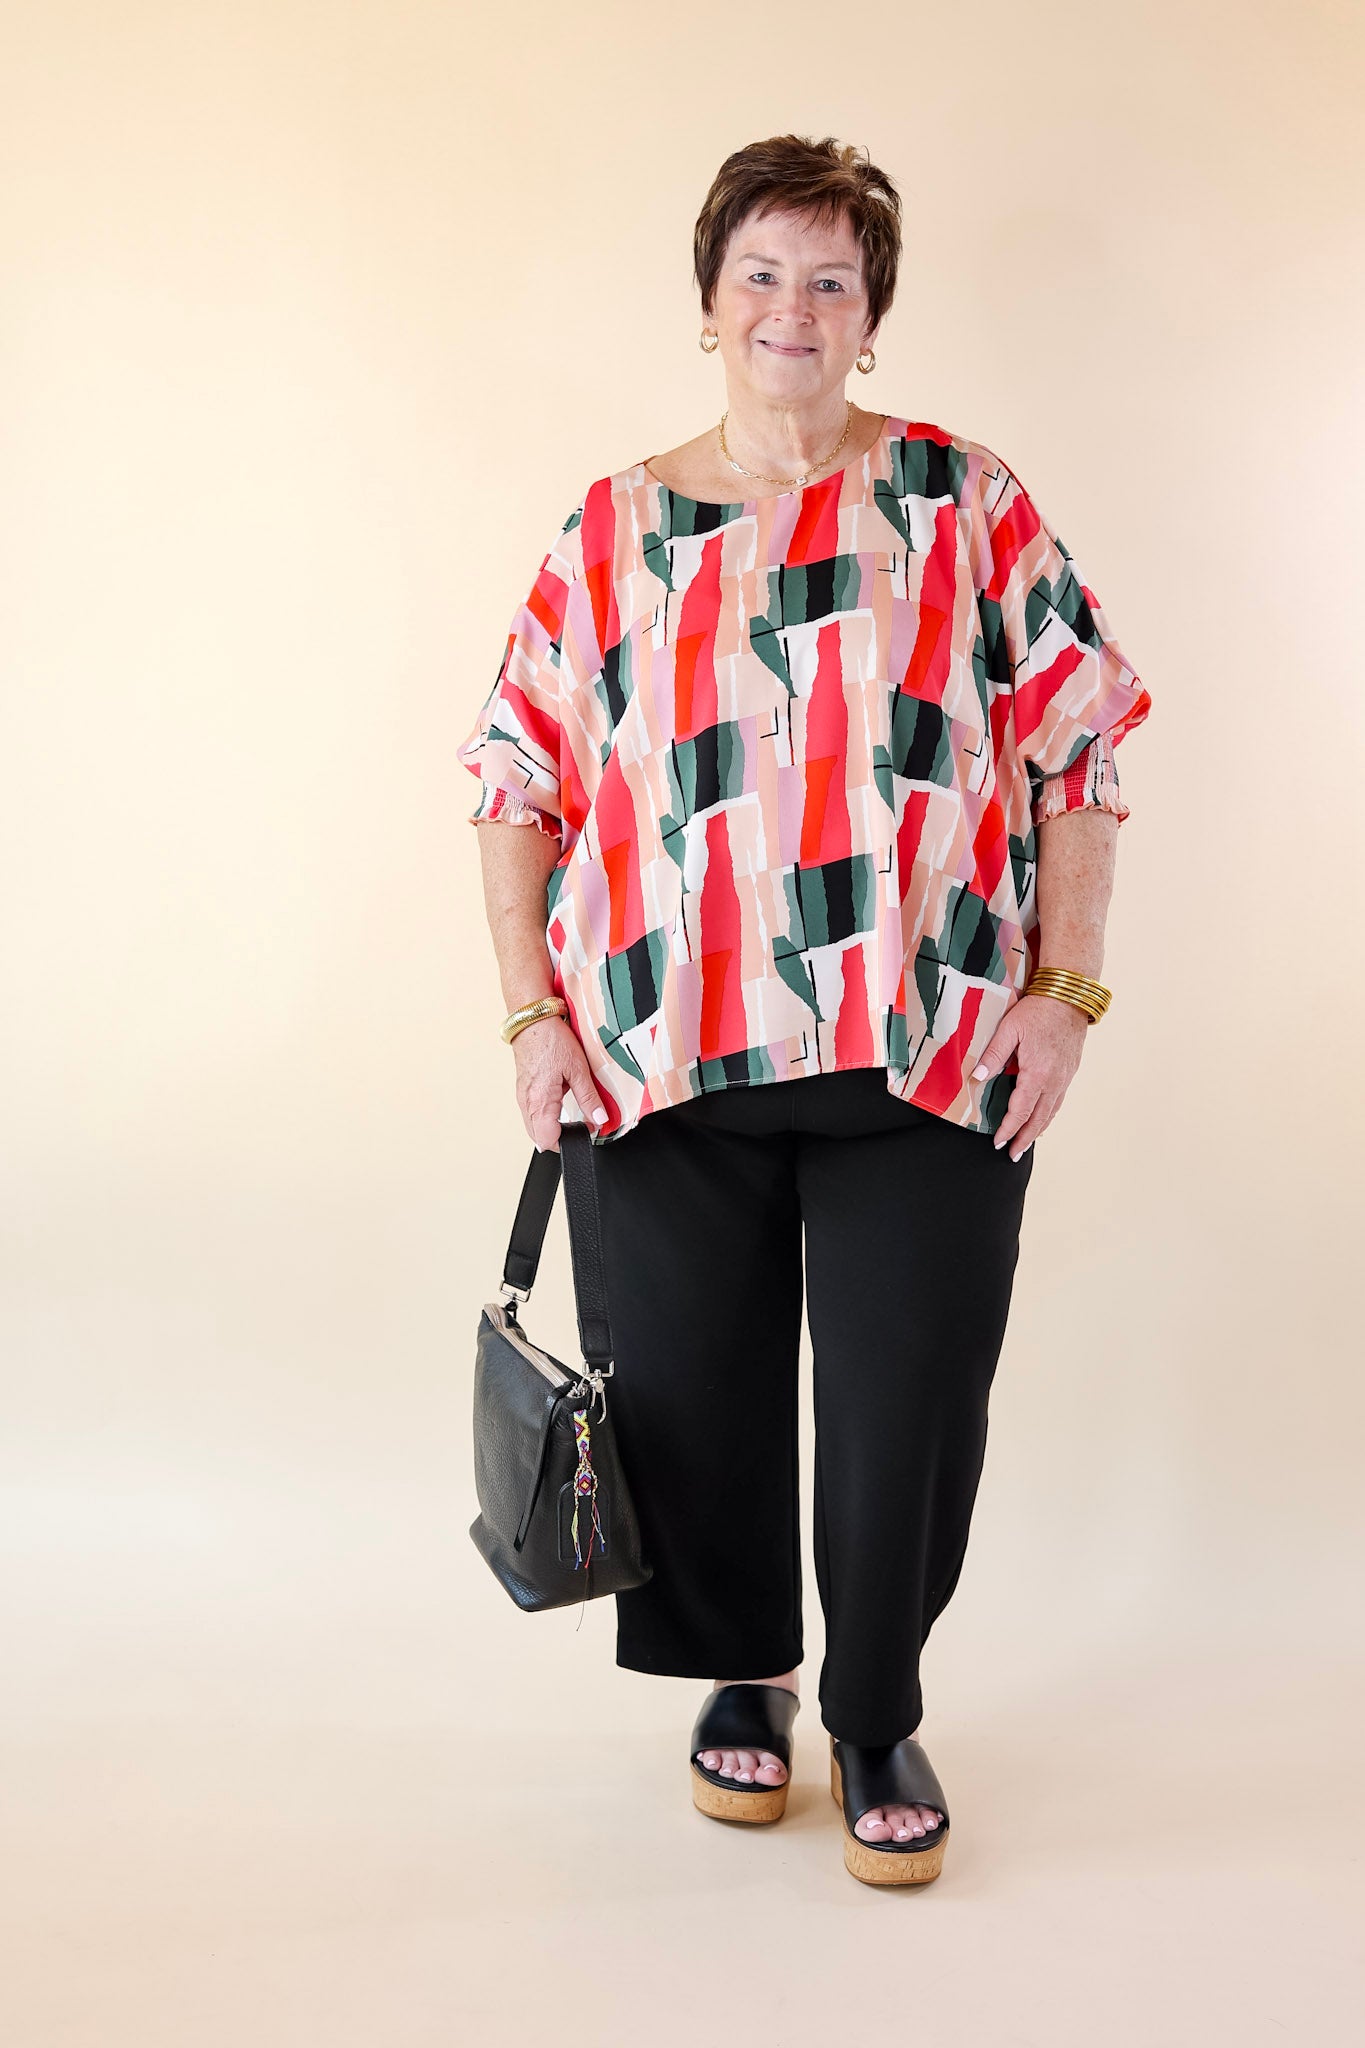 Museum Bound Abstract Print Top in Red and Green - Giddy Up Glamour Boutique